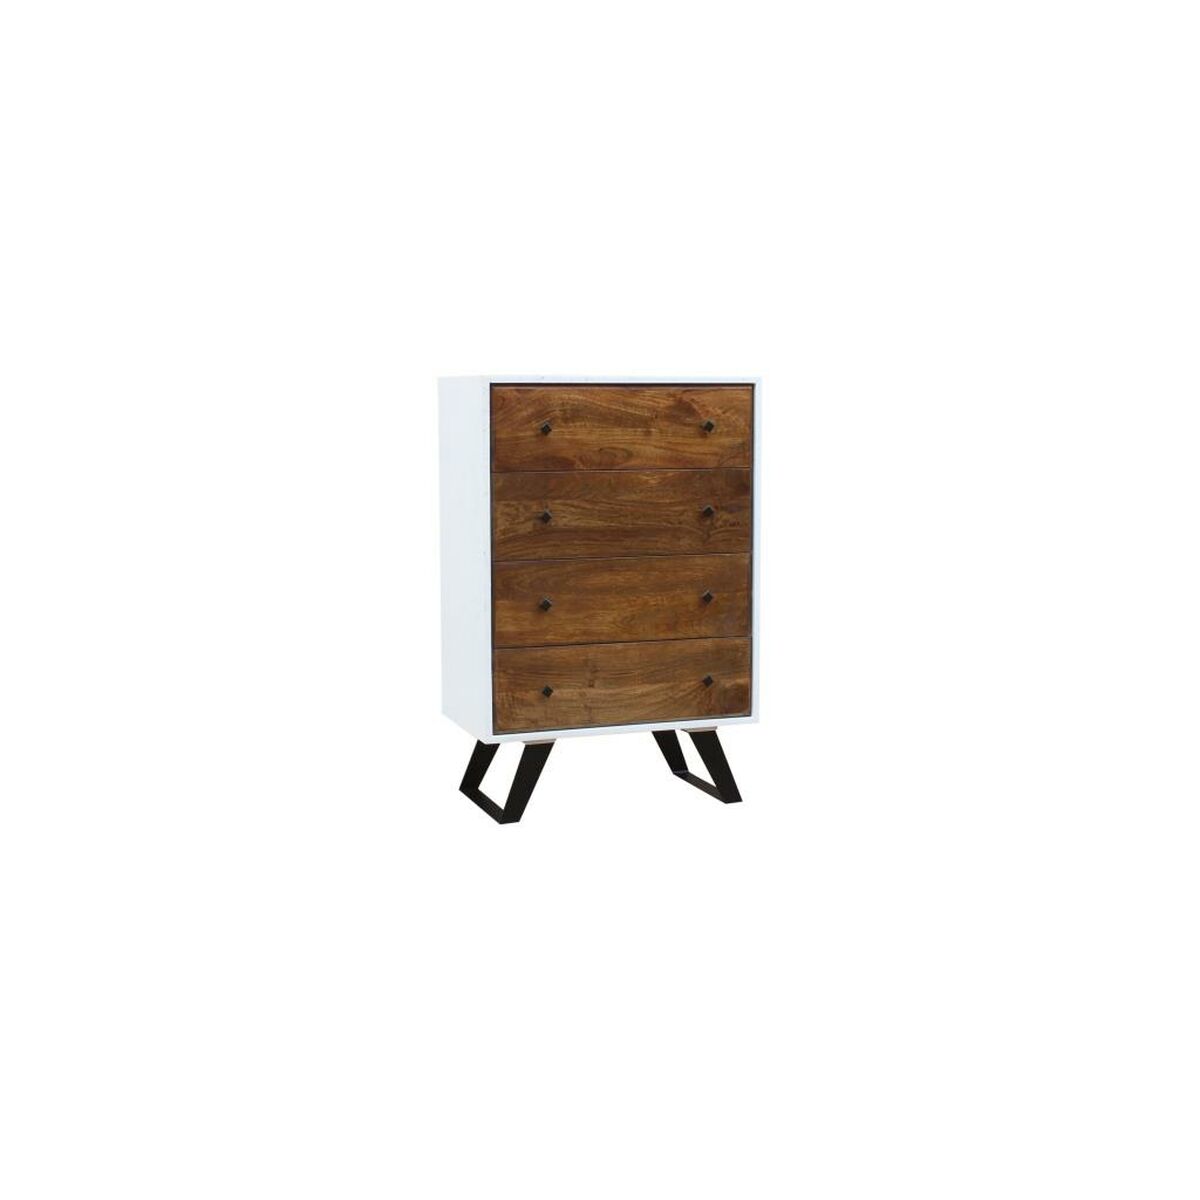 White Chest of drawers in Mango Wood with Black Metal Legs (70 x 40 x 105 cm)